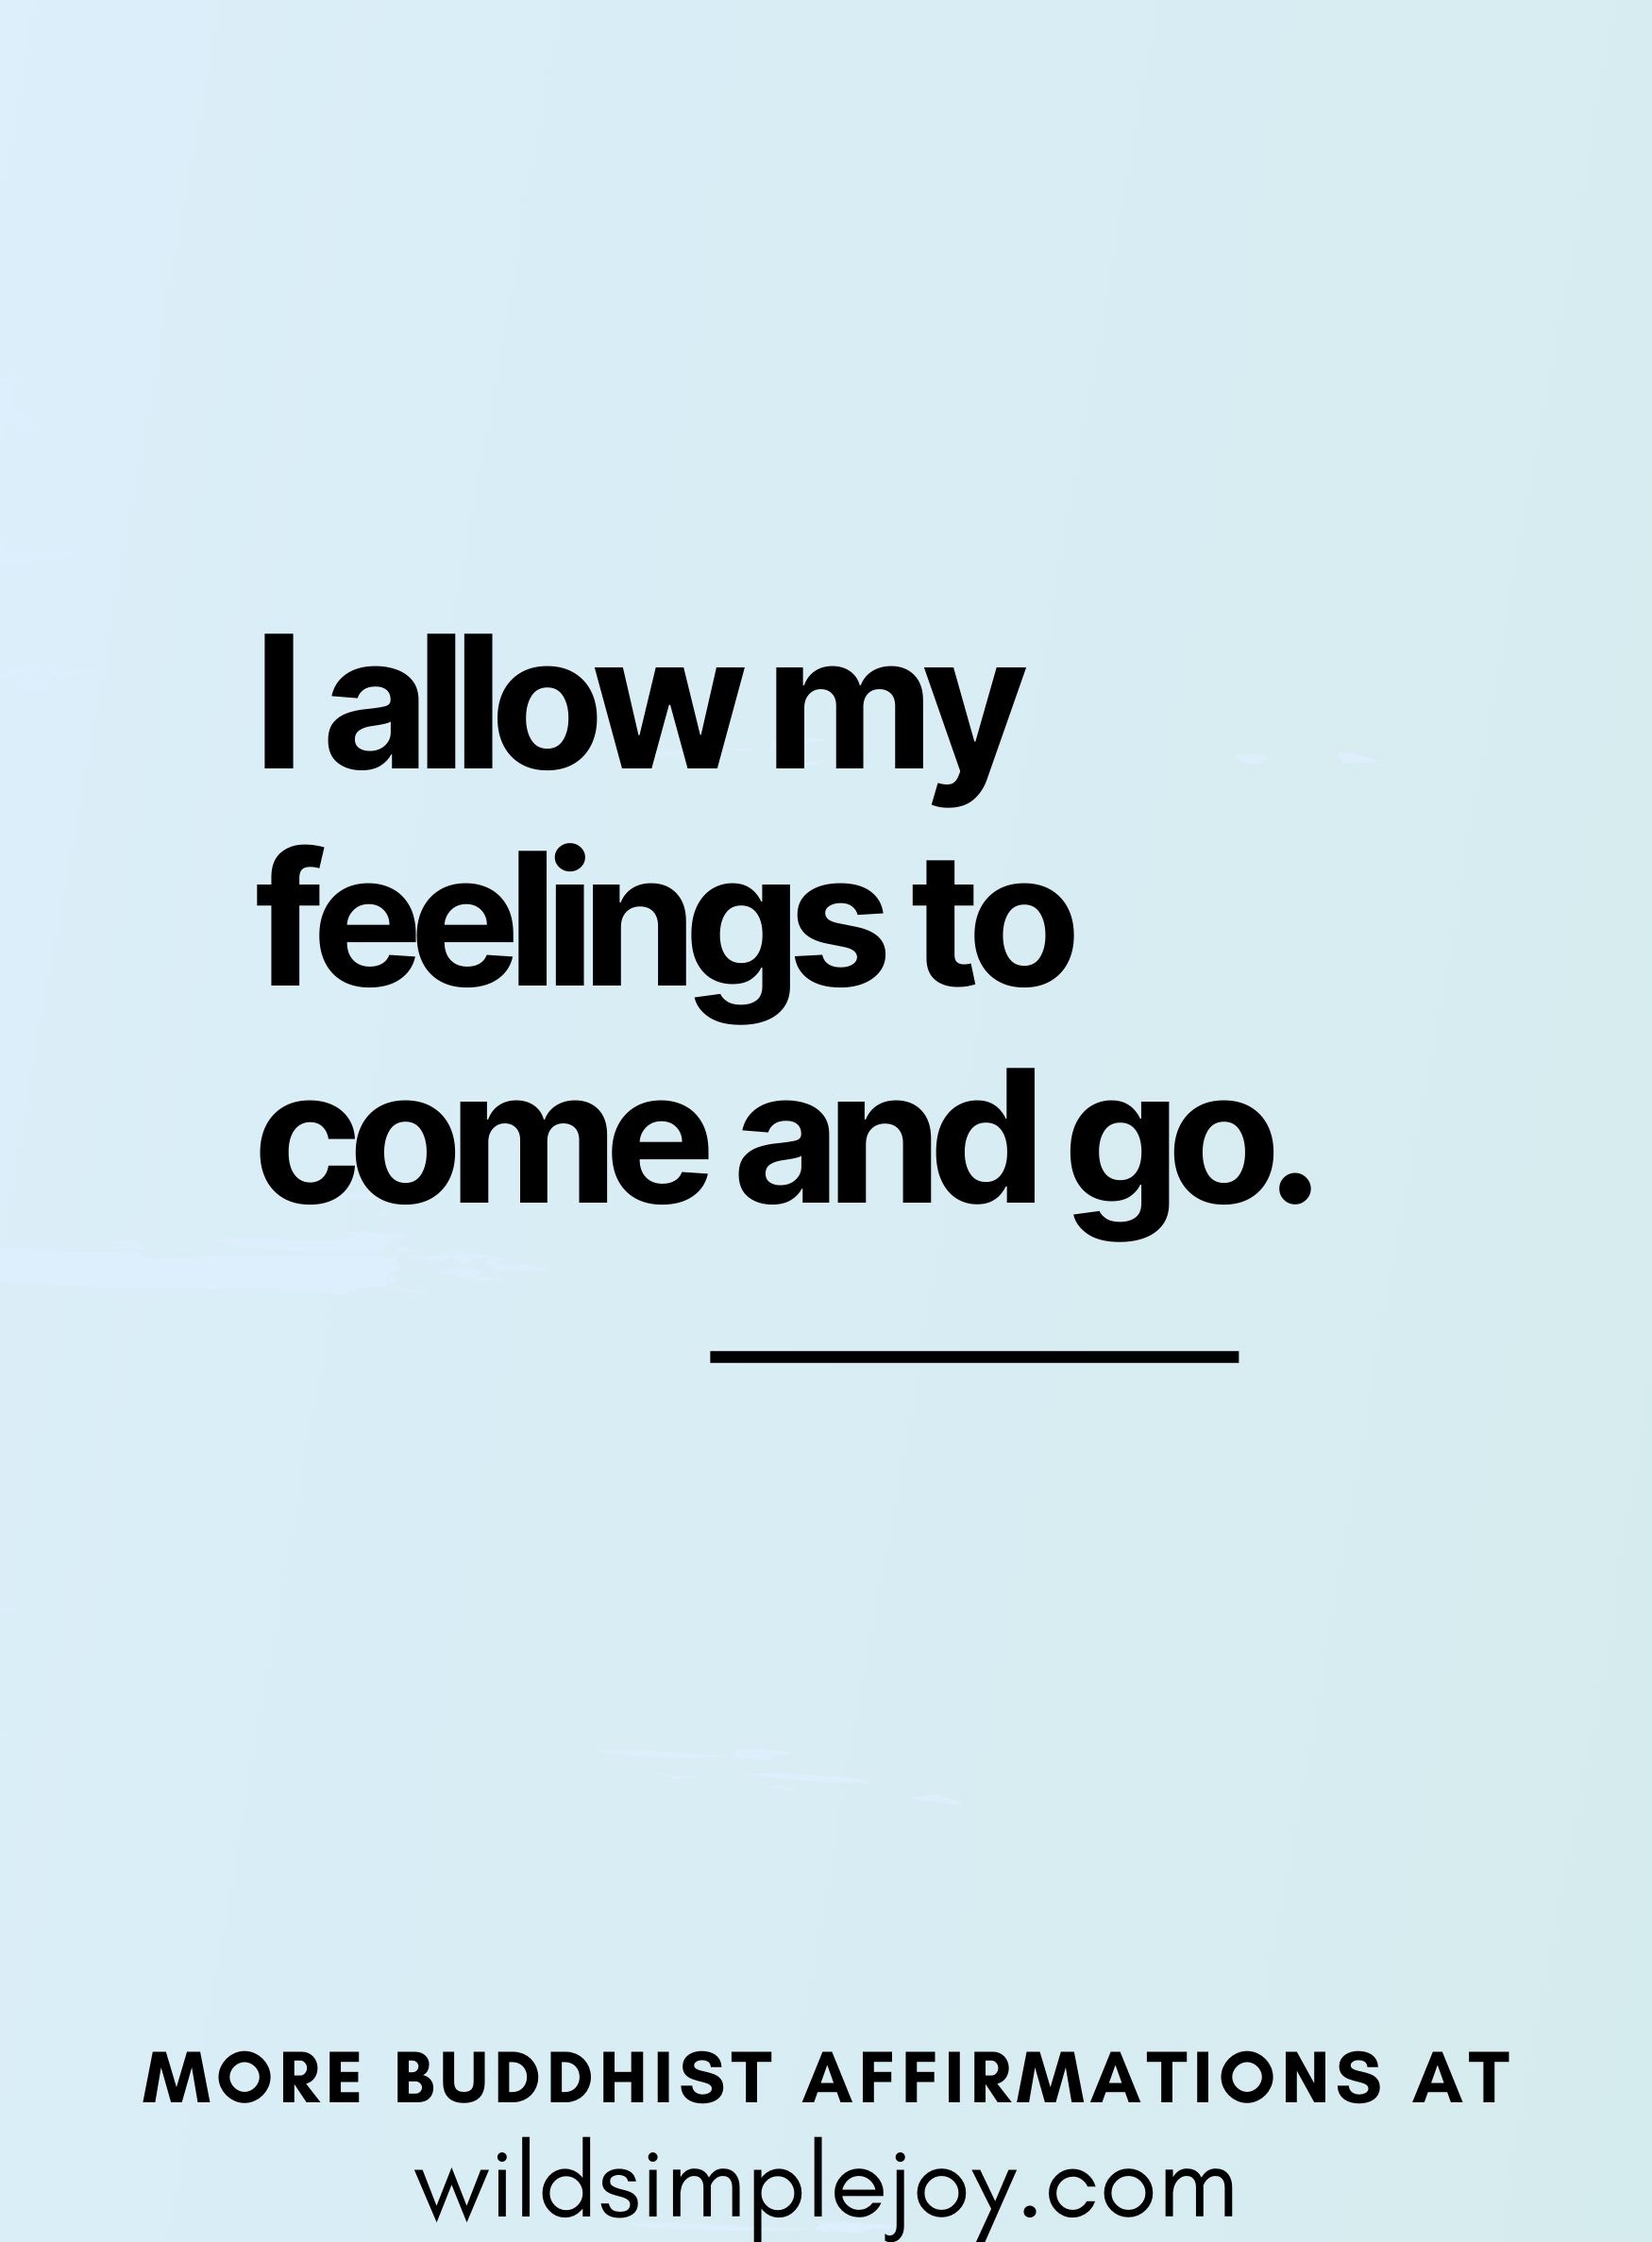 I allow my feelings to come and go. (on a blue and teal background)